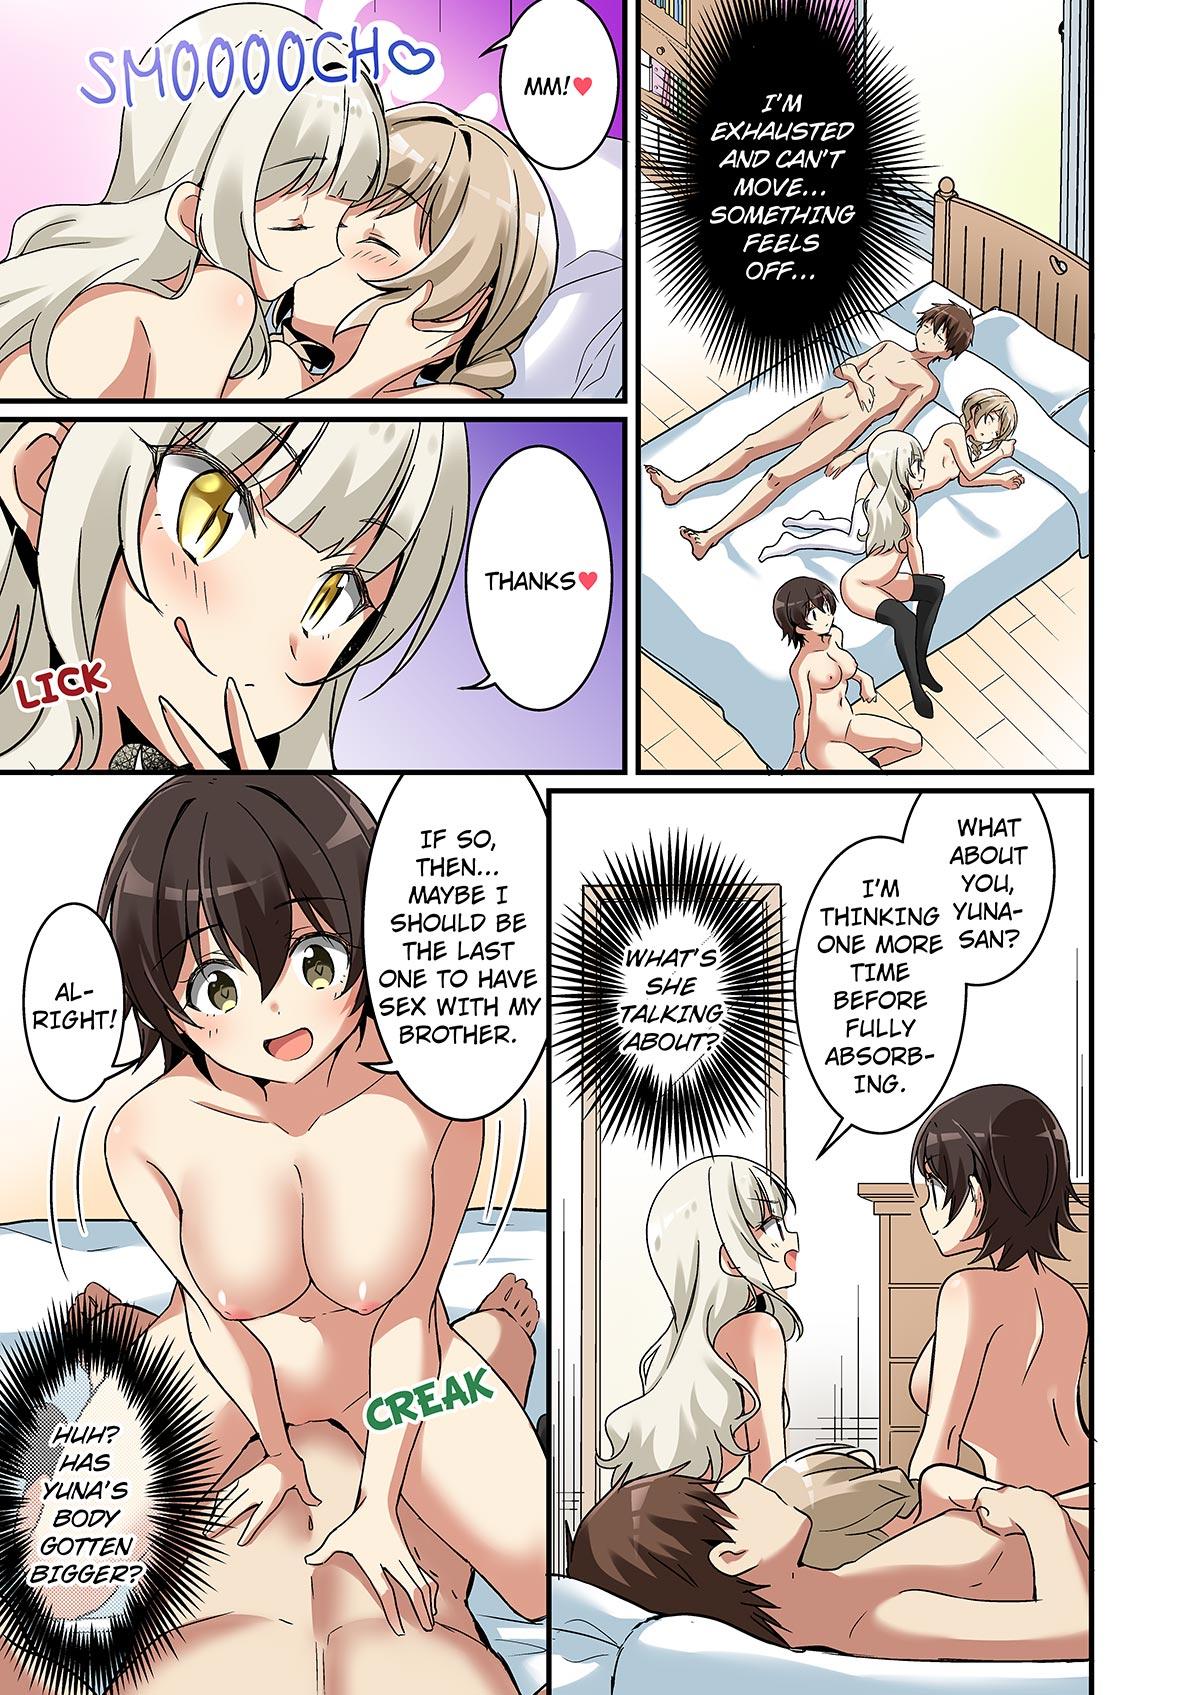 Wetpussy [TSF no F (NOMU)] Succubus Club e Youkoso ~Imouto no Imouto ni Sareta Ore~ | Welcome to the Succubus Sorority ~Turning into my younger sister's little sister~ [English] - Original Full - Page 12